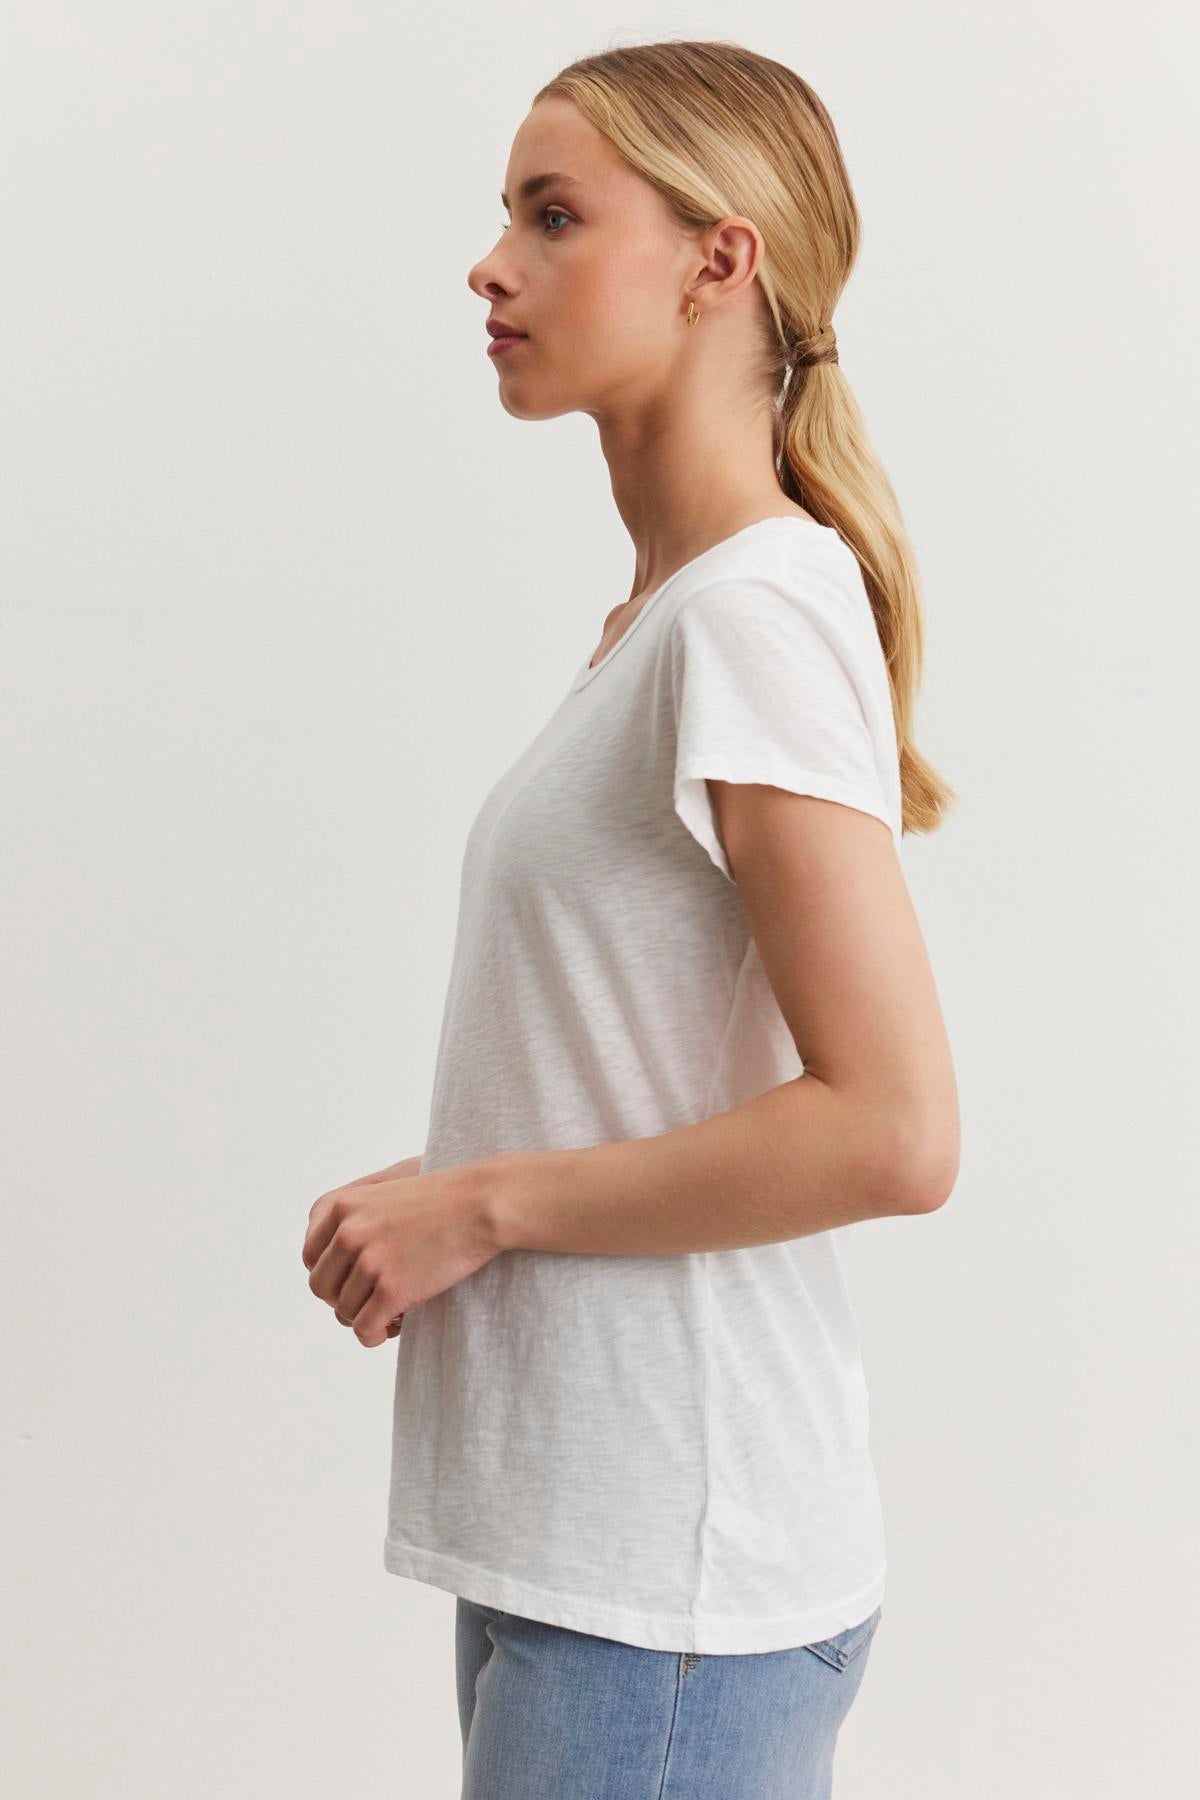   A woman with long blonde hair tied in a low ponytail is standing in profile view, wearing the ODELIA TEE from Velvet by Graham & Spencer made from premium cotton slub fabric and light blue jeans. This versatile wardrobe essential perfectly complements the plain white background as she faces left. 